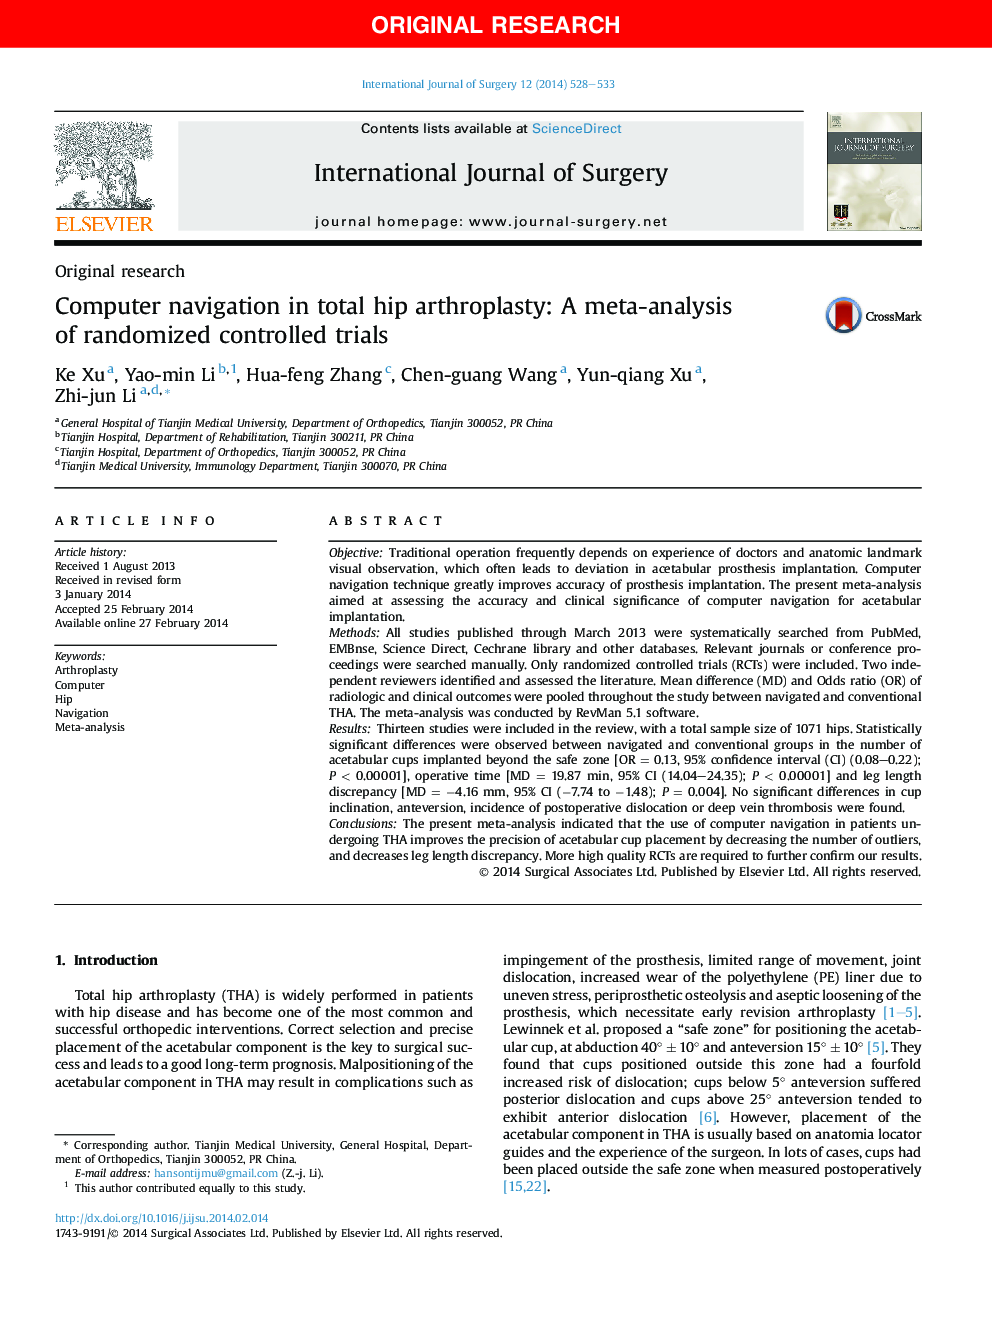 Computer navigation in total hip arthroplasty: A meta-analysis of randomized controlled trials